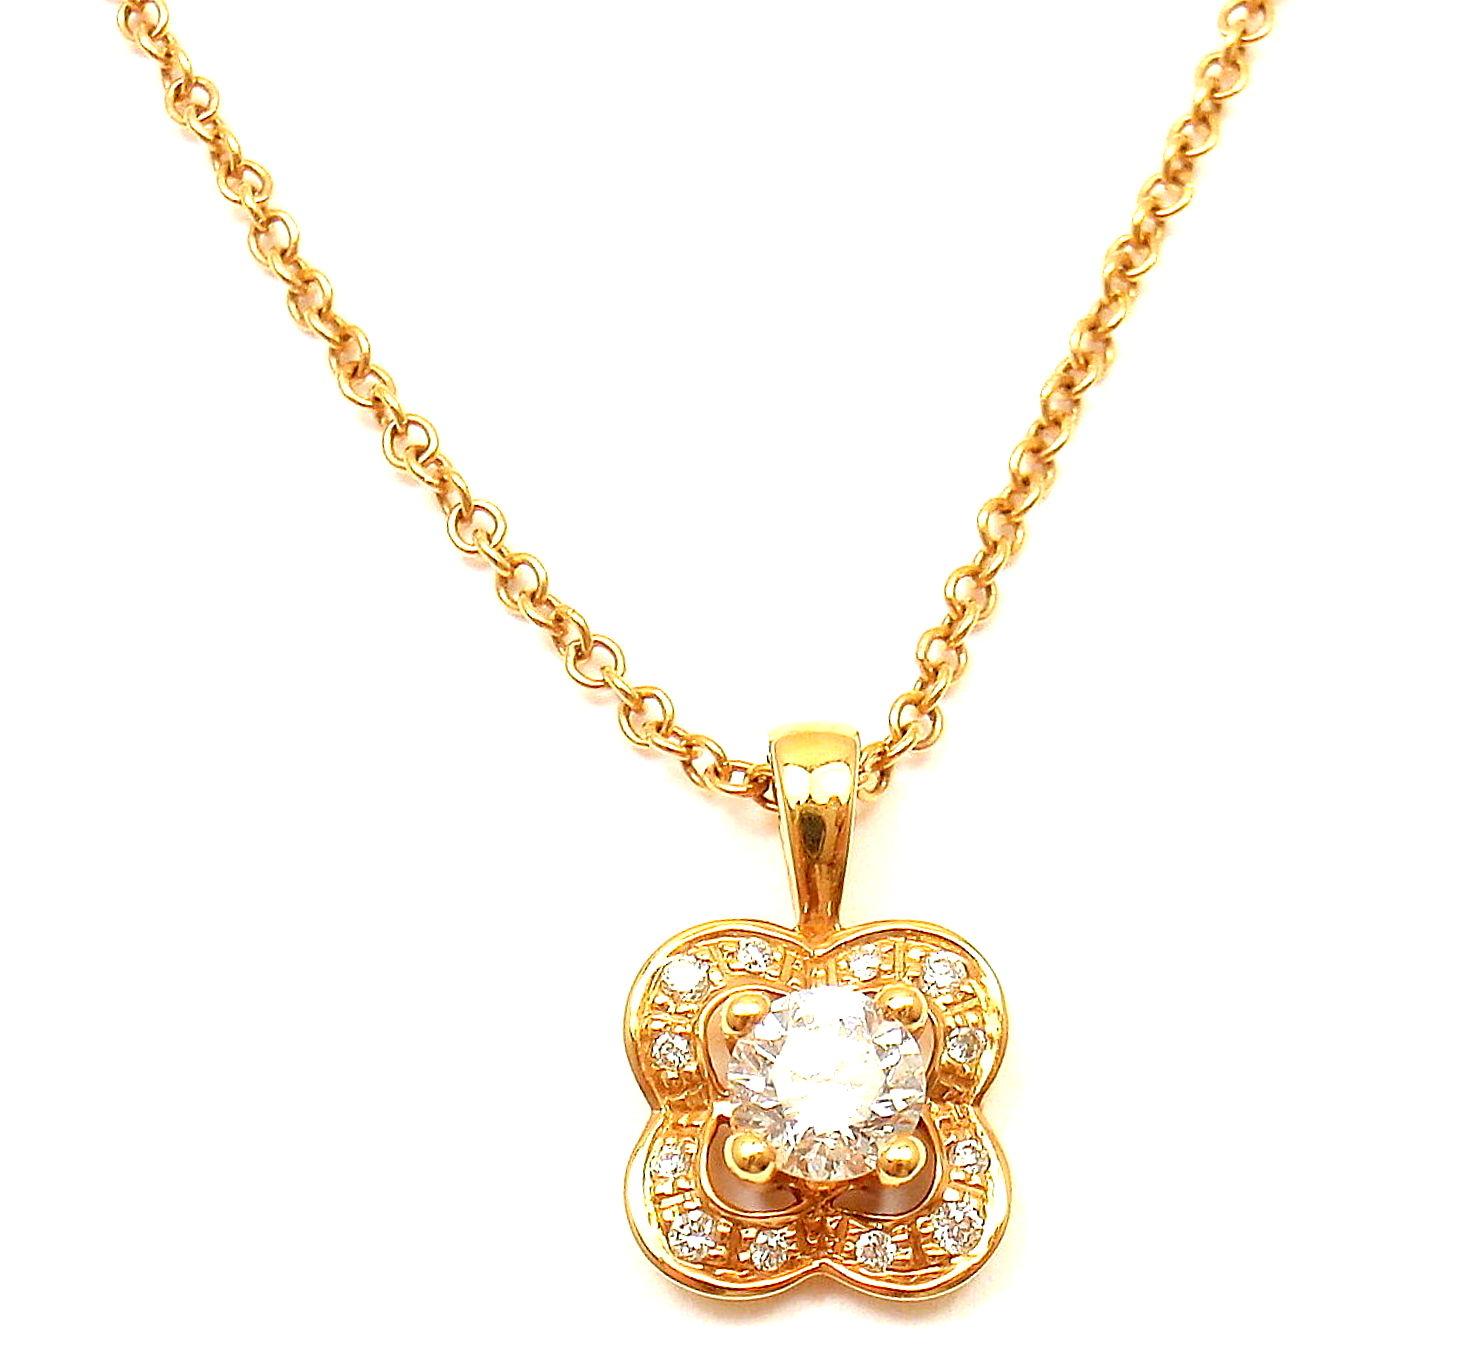 18k Rose Gold Diamond Flower Pendant Necklace by Mauboussin. 
With 1 round brilliant cut diamond VS1 clarity, G color total weight .30 ct
 12 round brilliant cut diamonds VS1 clarity, G color total weight .24ct
Details:
Measurements: Length: